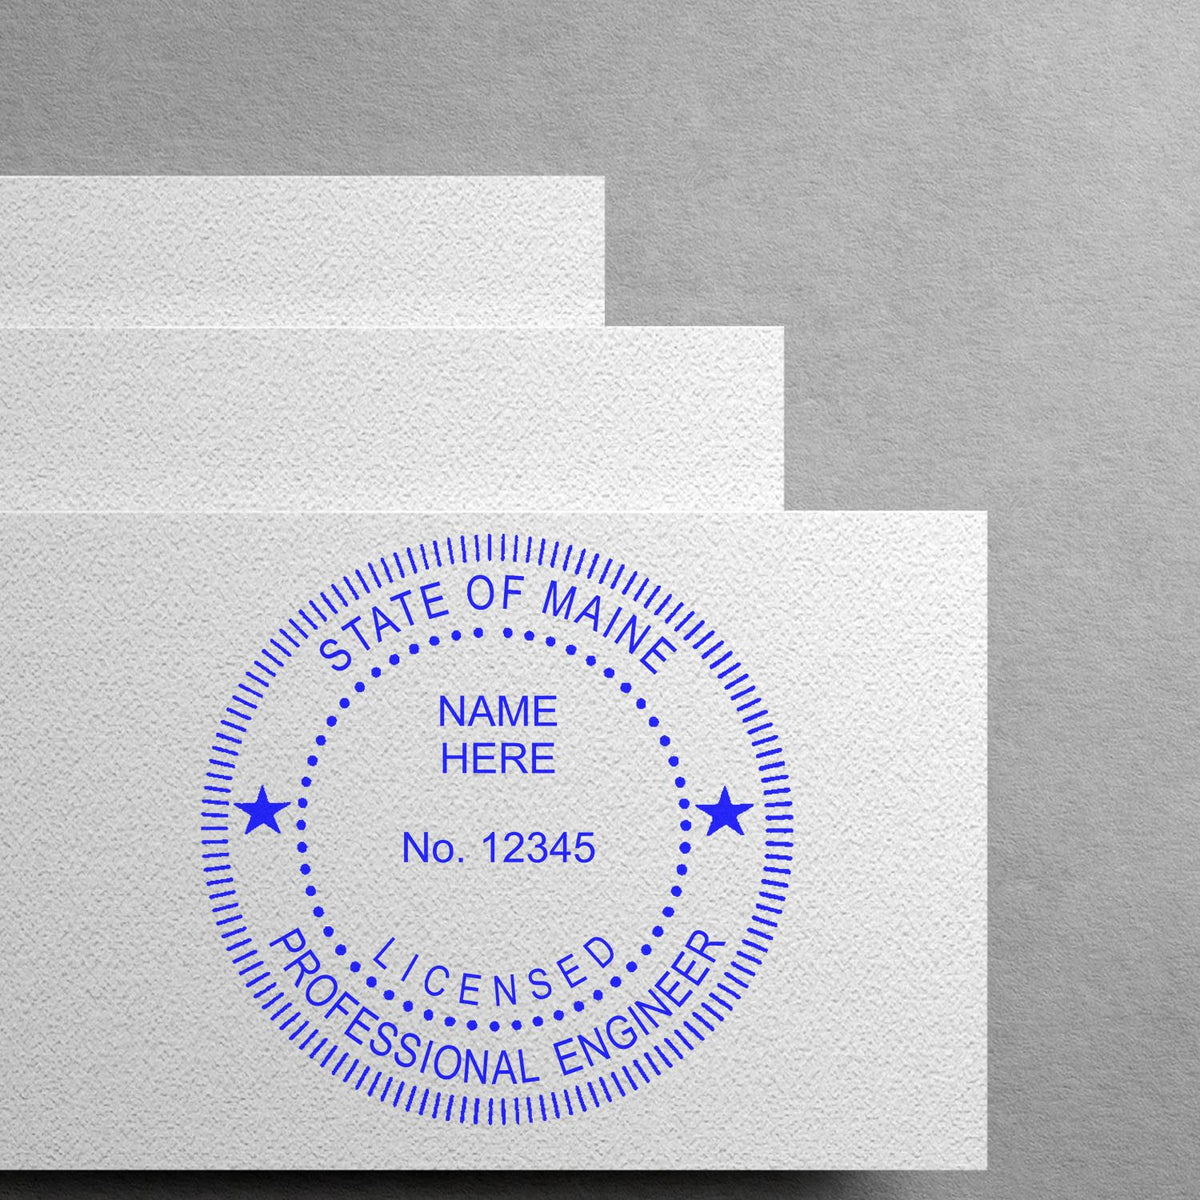 The Slim Pre-Inked Maine Professional Engineer Seal Stamp stamp impression comes to life with a crisp, detailed photo on paper - showcasing true professional quality.